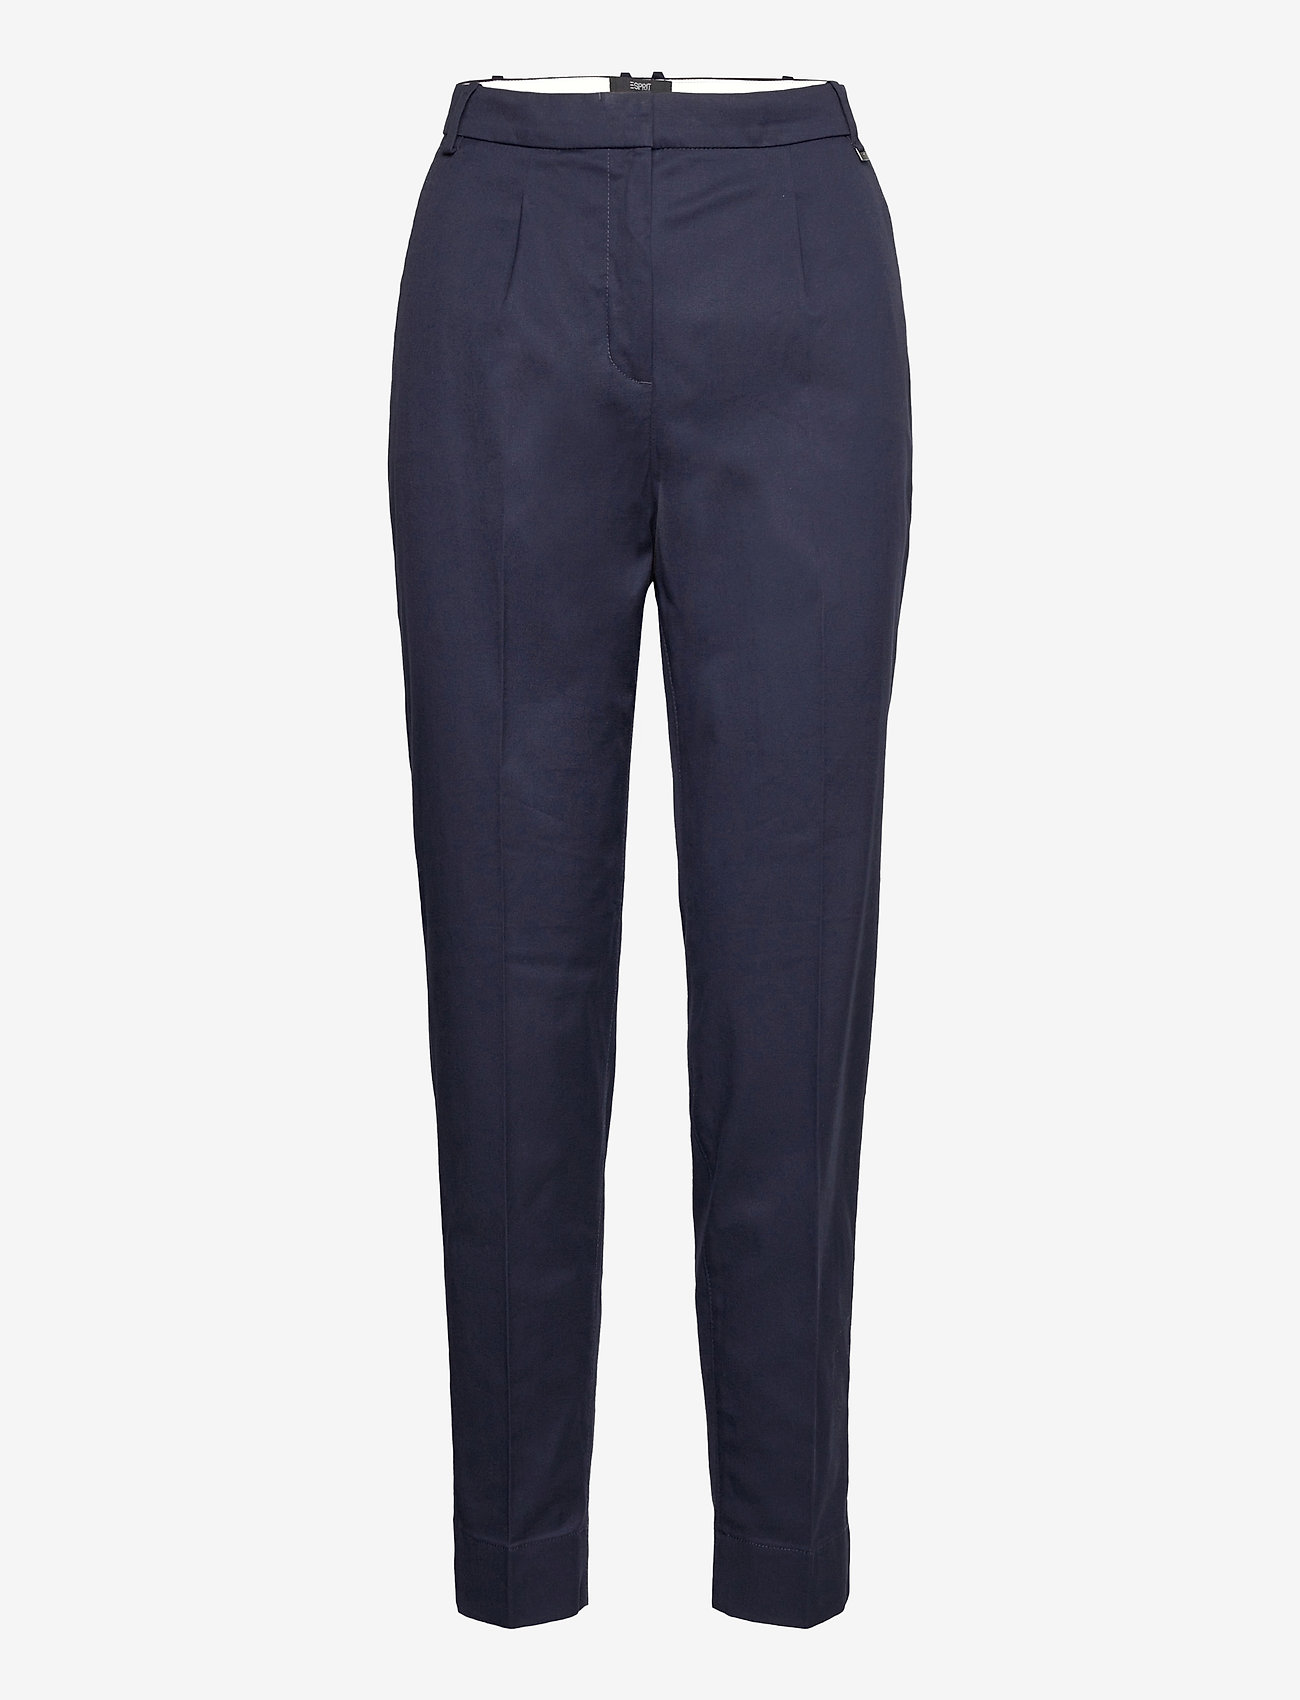 Esprit Collection - Business chinos made of stretch cotton - spodnie proste - navy - 0